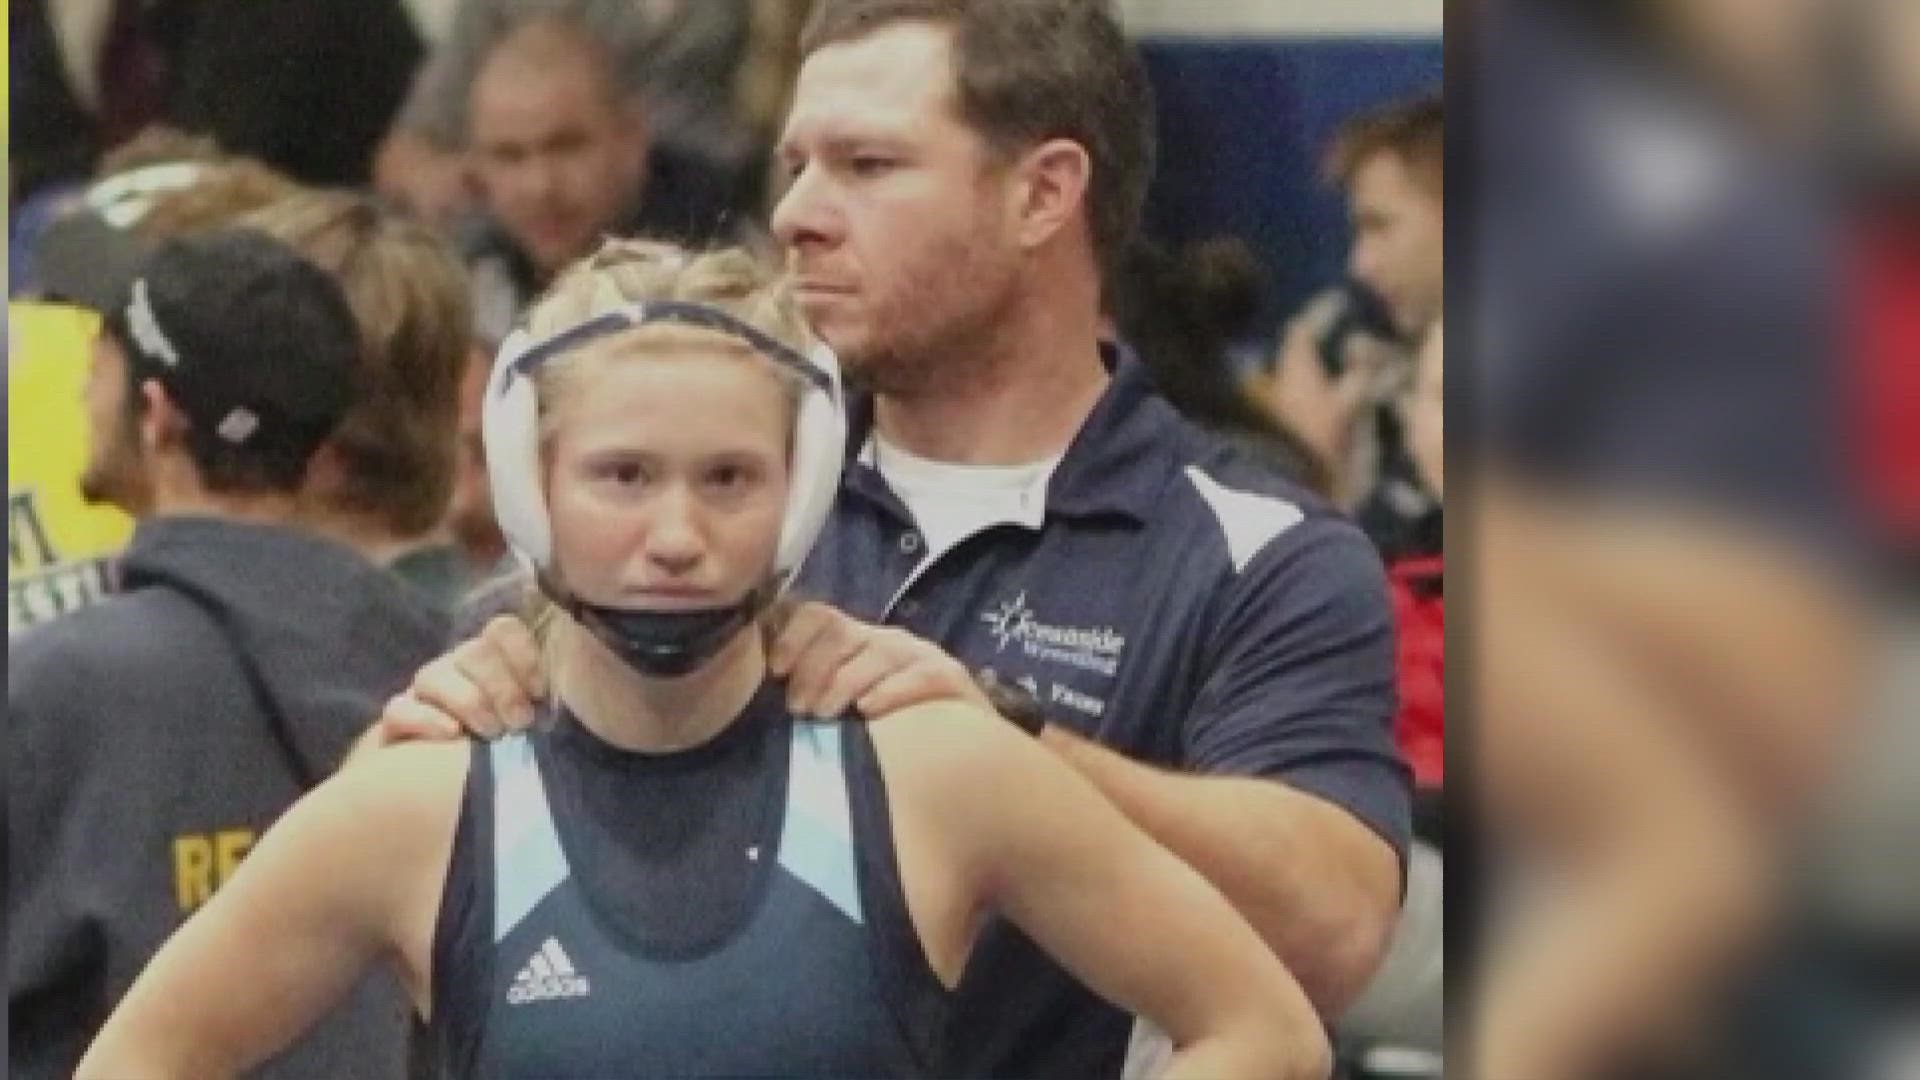 Maddie is the only girl on Oceanside's wrestling team, but she said she hopes her accomplishment will help with that. "I hope more girls get into it," she said.